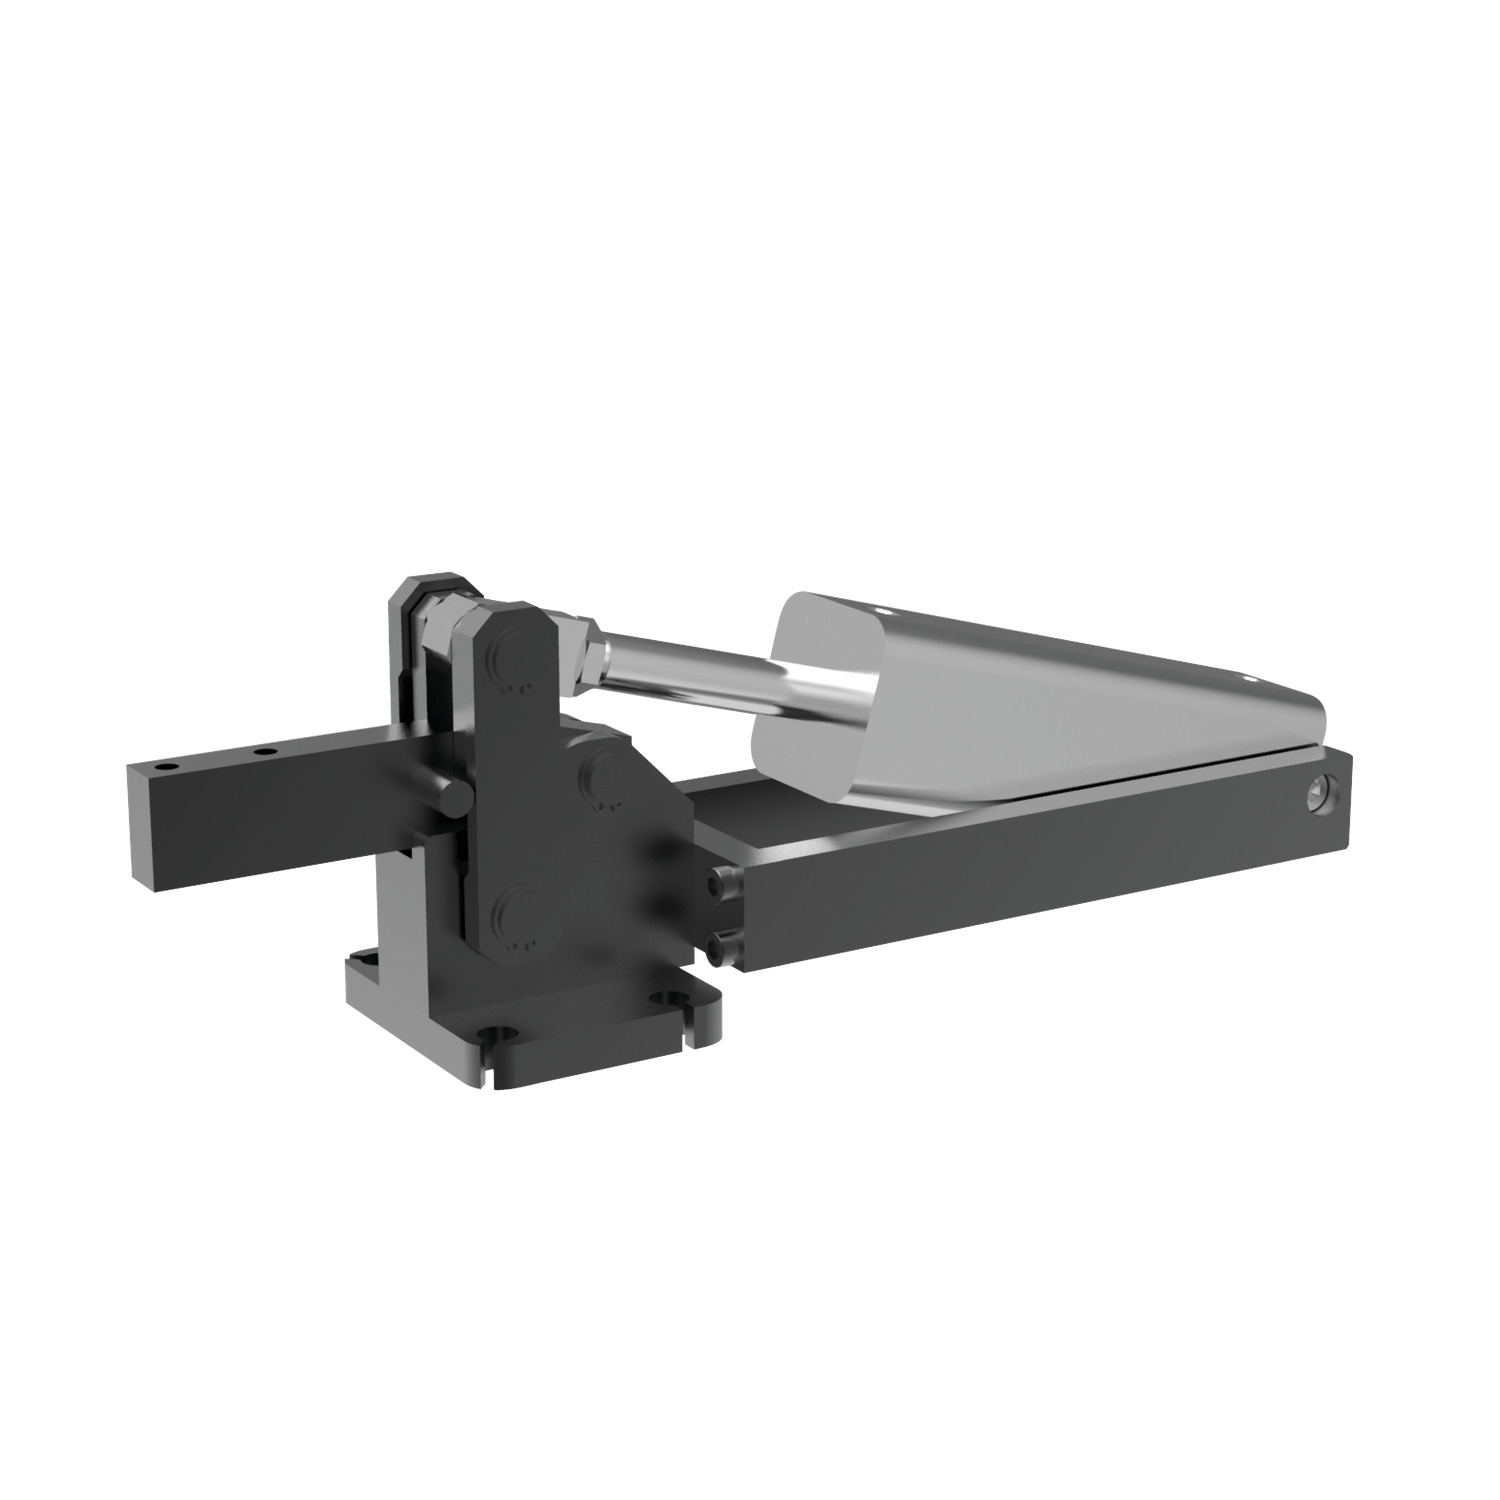 47500 - Heavy Duty Pneumatic Toggle Clamps